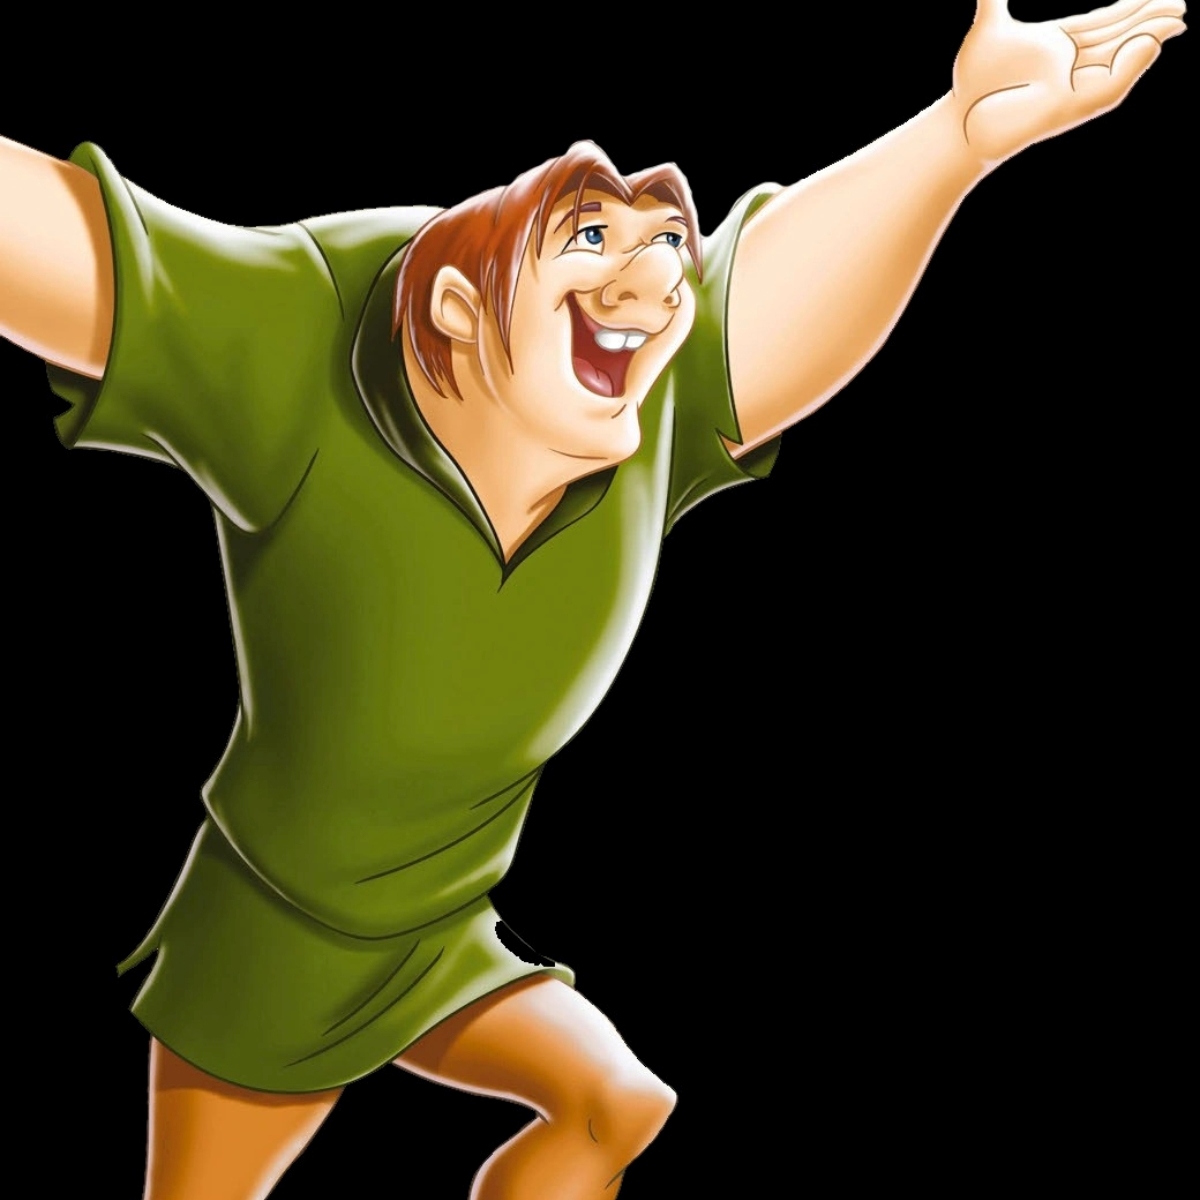 17-facts-about-quasimodo-the-hunchback-of-notre-dame-ii